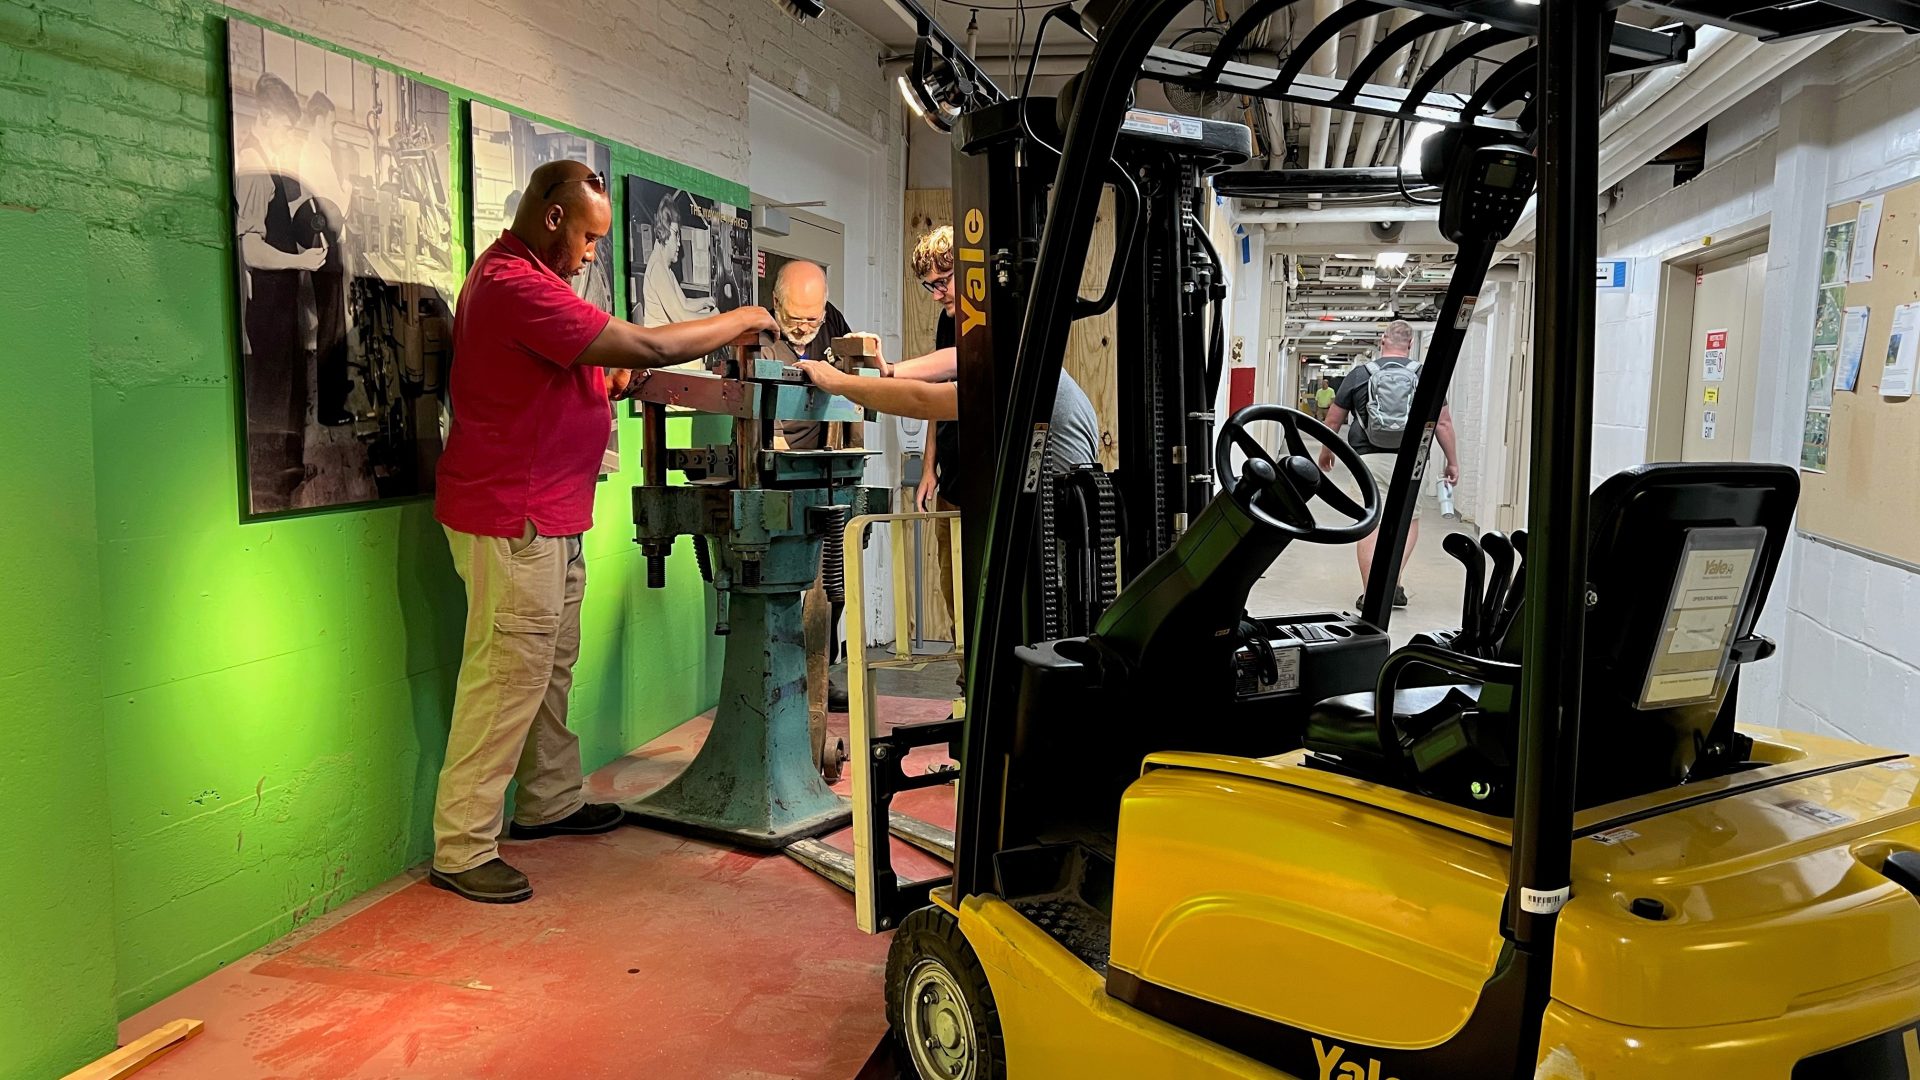 A yellow forklift fills the right foreground, its forks inserted beneath the base of a light blue steel record pressing machine, while three men steady the machine with their hands.